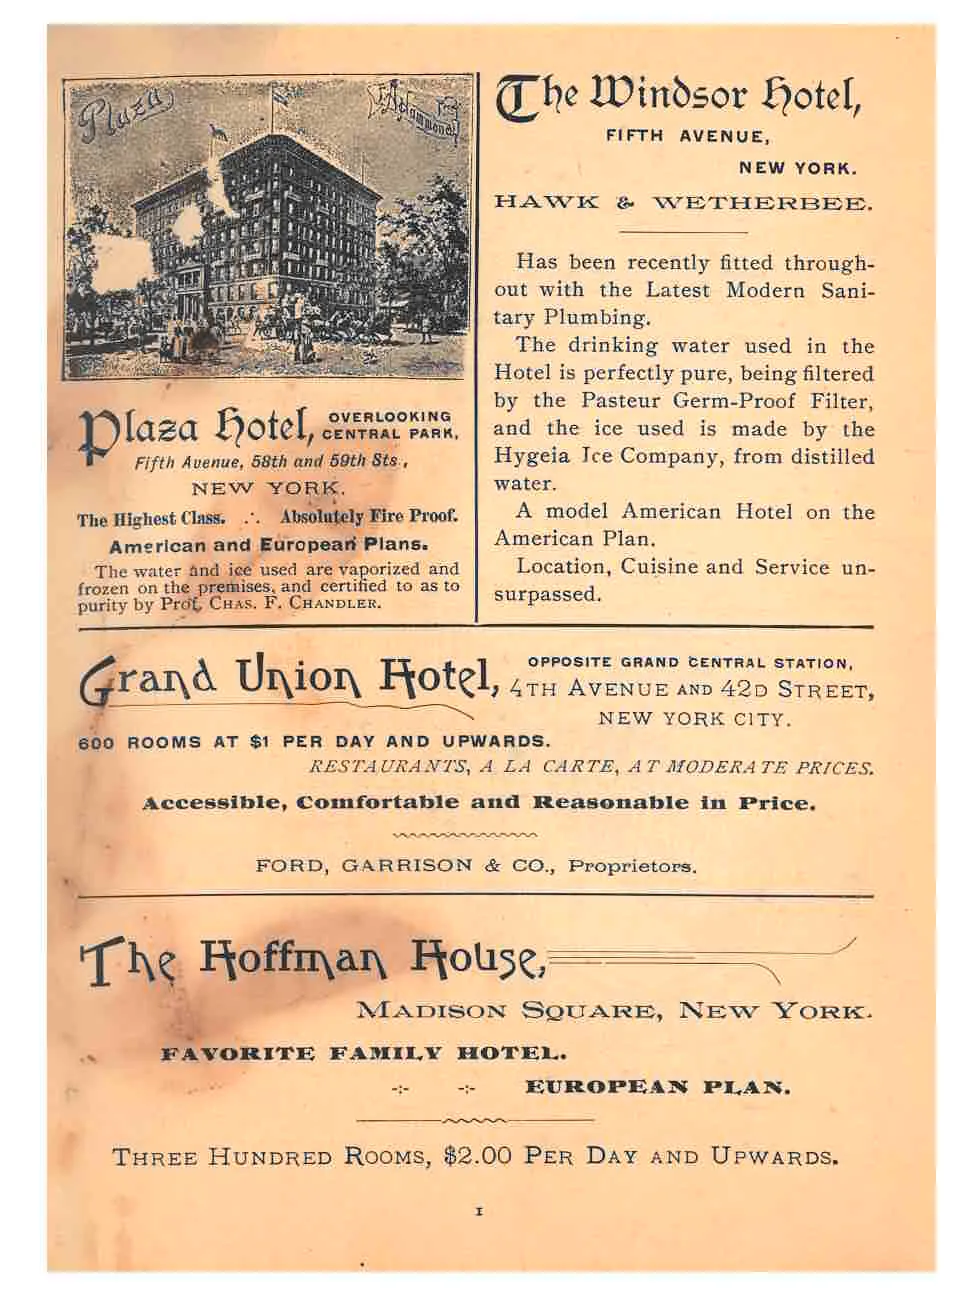 Interior page with advertisements for various hotels.